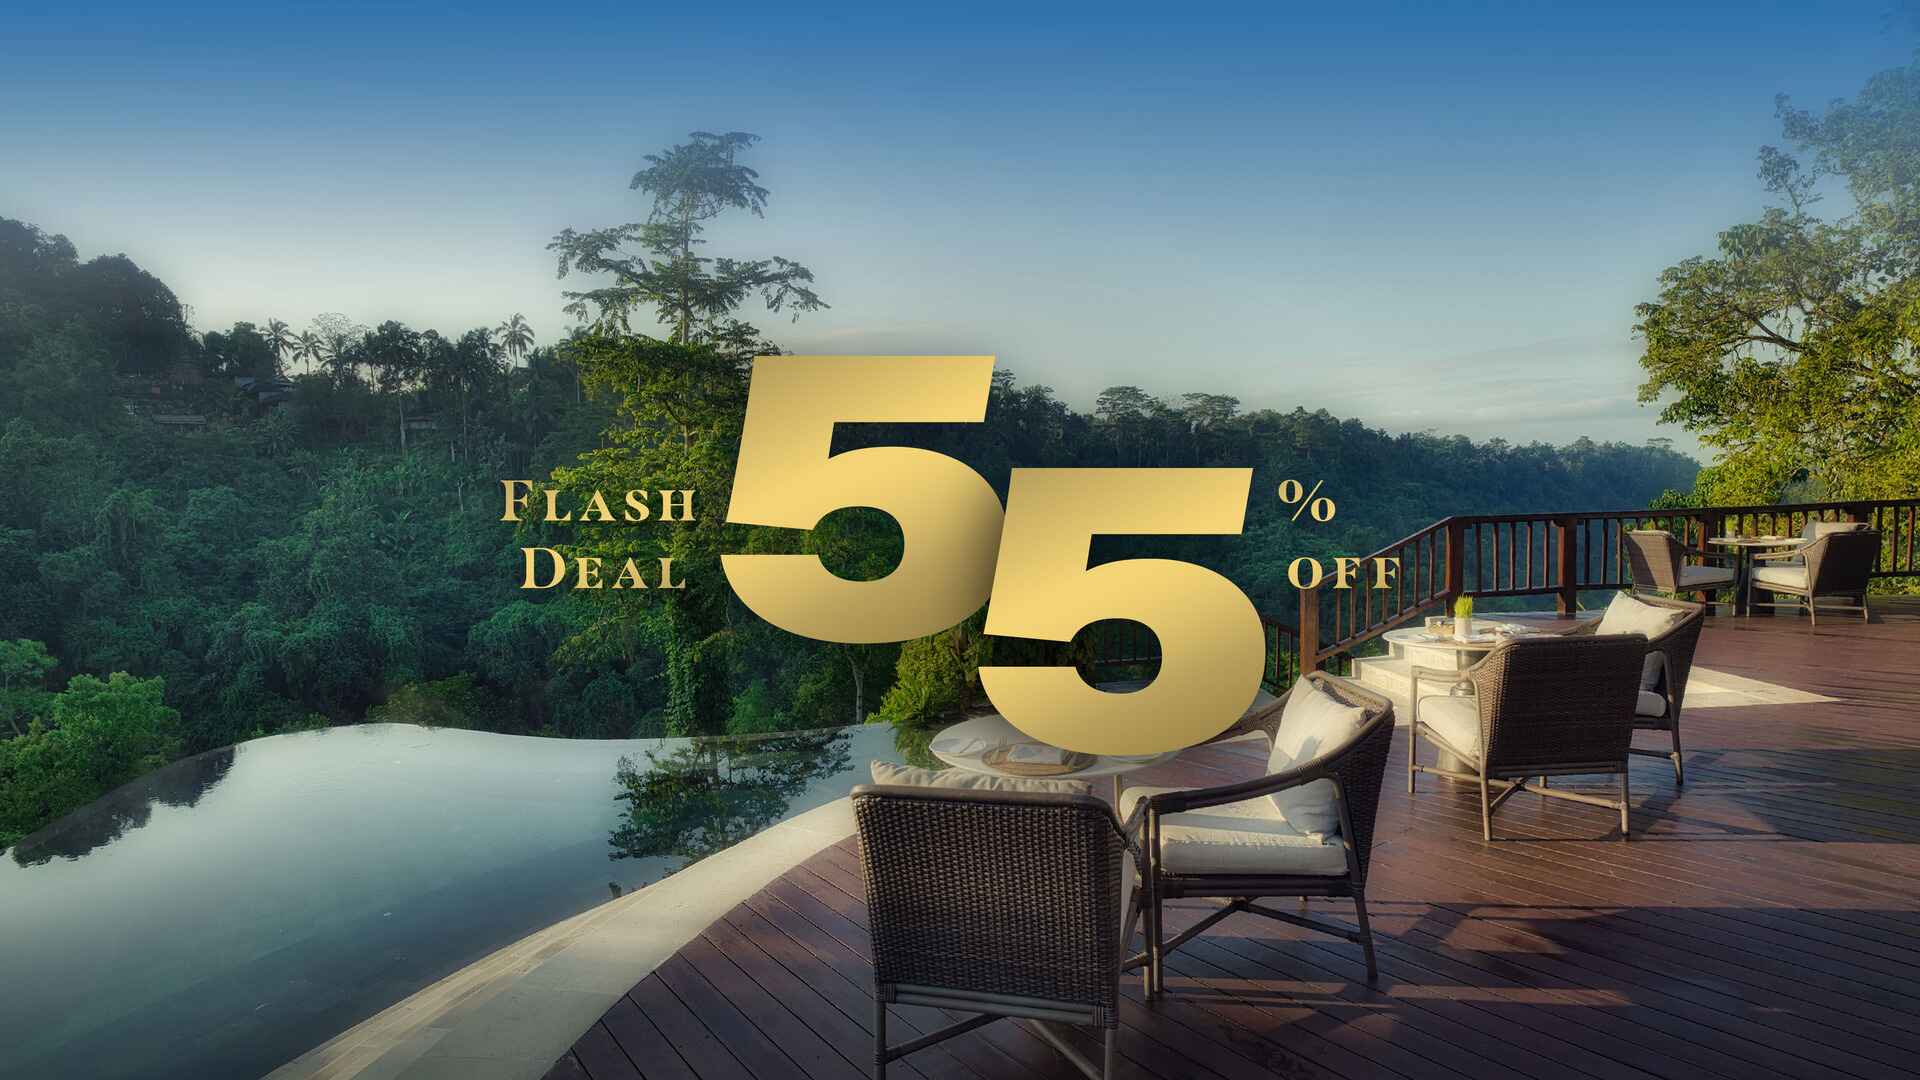 Bali All Inclusive Resort - Congrats! Your Jungle Bali Paradise Awaits with 55% OFF